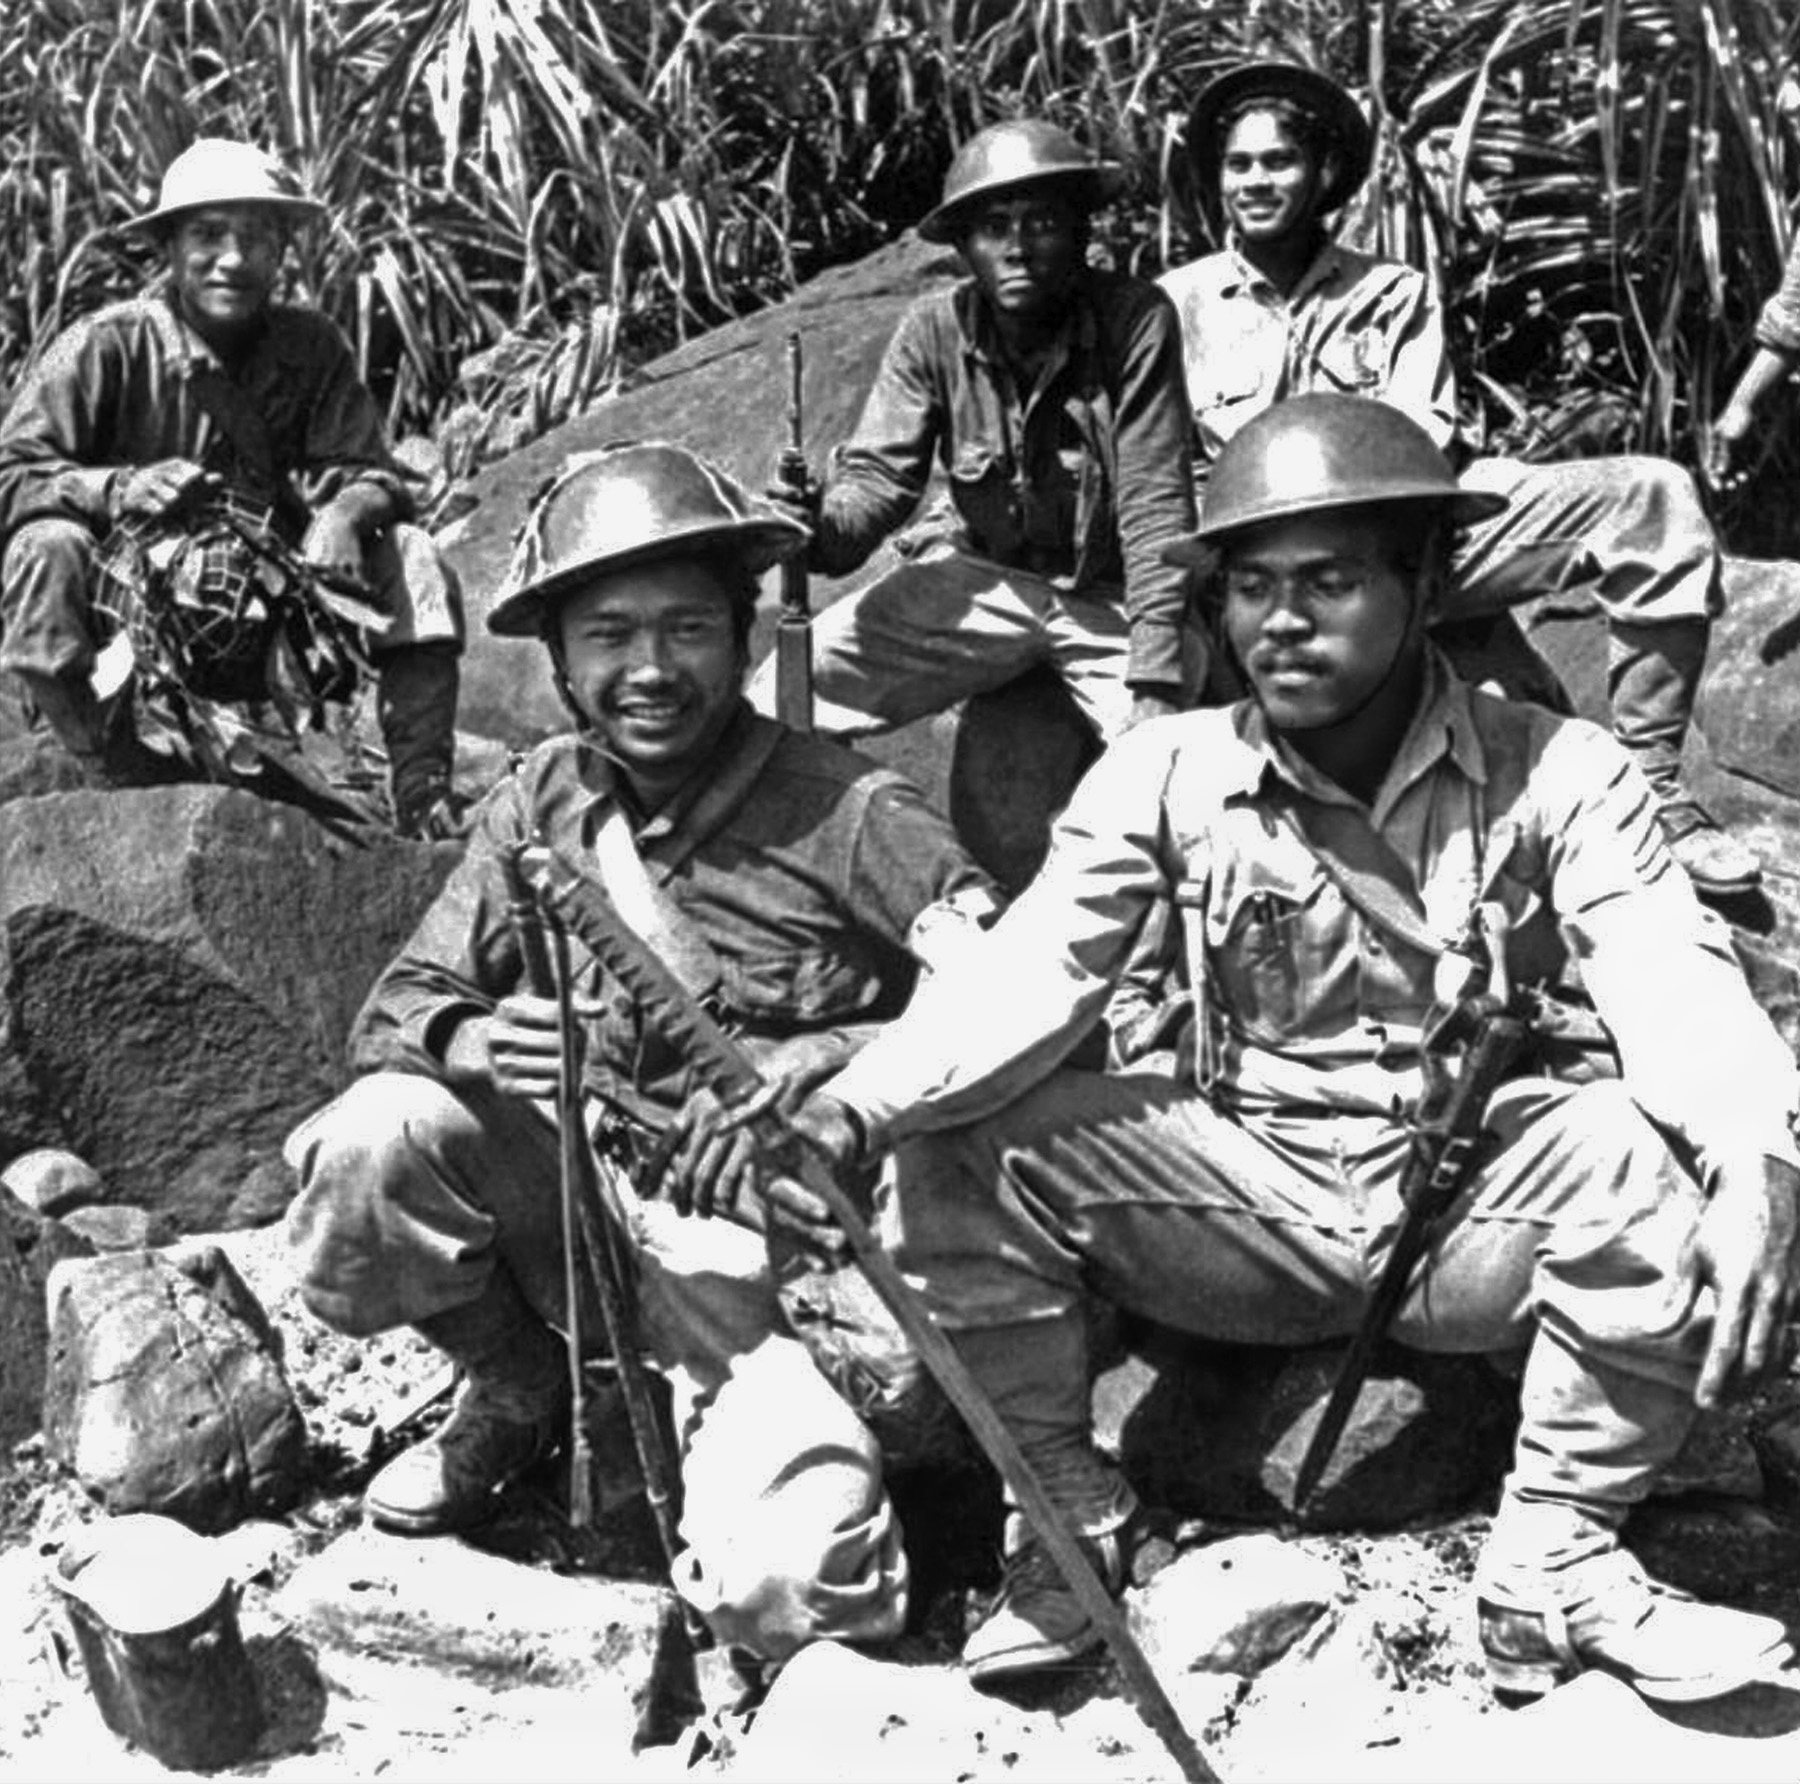 Dressed in U.S. Army uniforms, a unit of Filipino Scouts appears to be confident in its ability to halt the Japanese incursion.